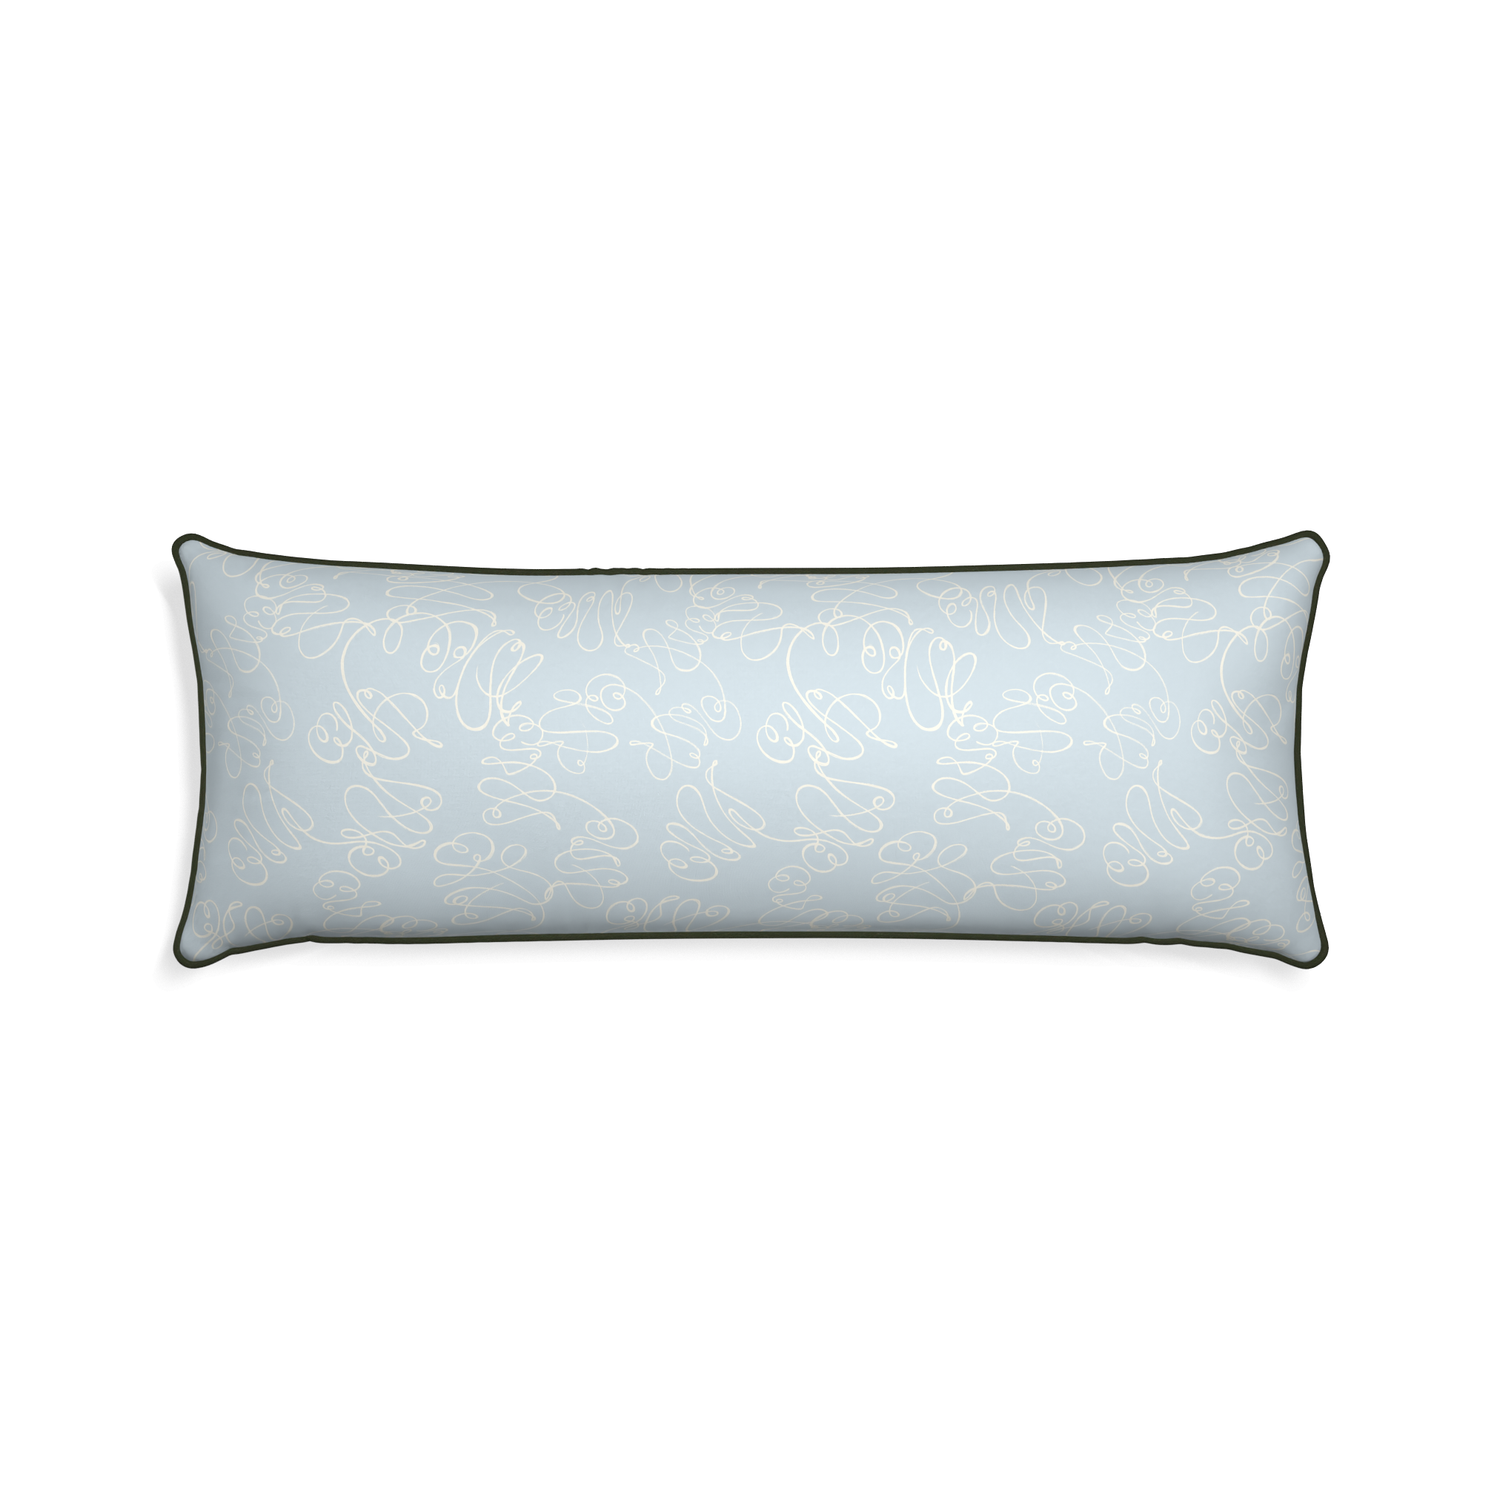 Xl-lumbar mirabella custom powder blue abstractpillow with f piping on white background